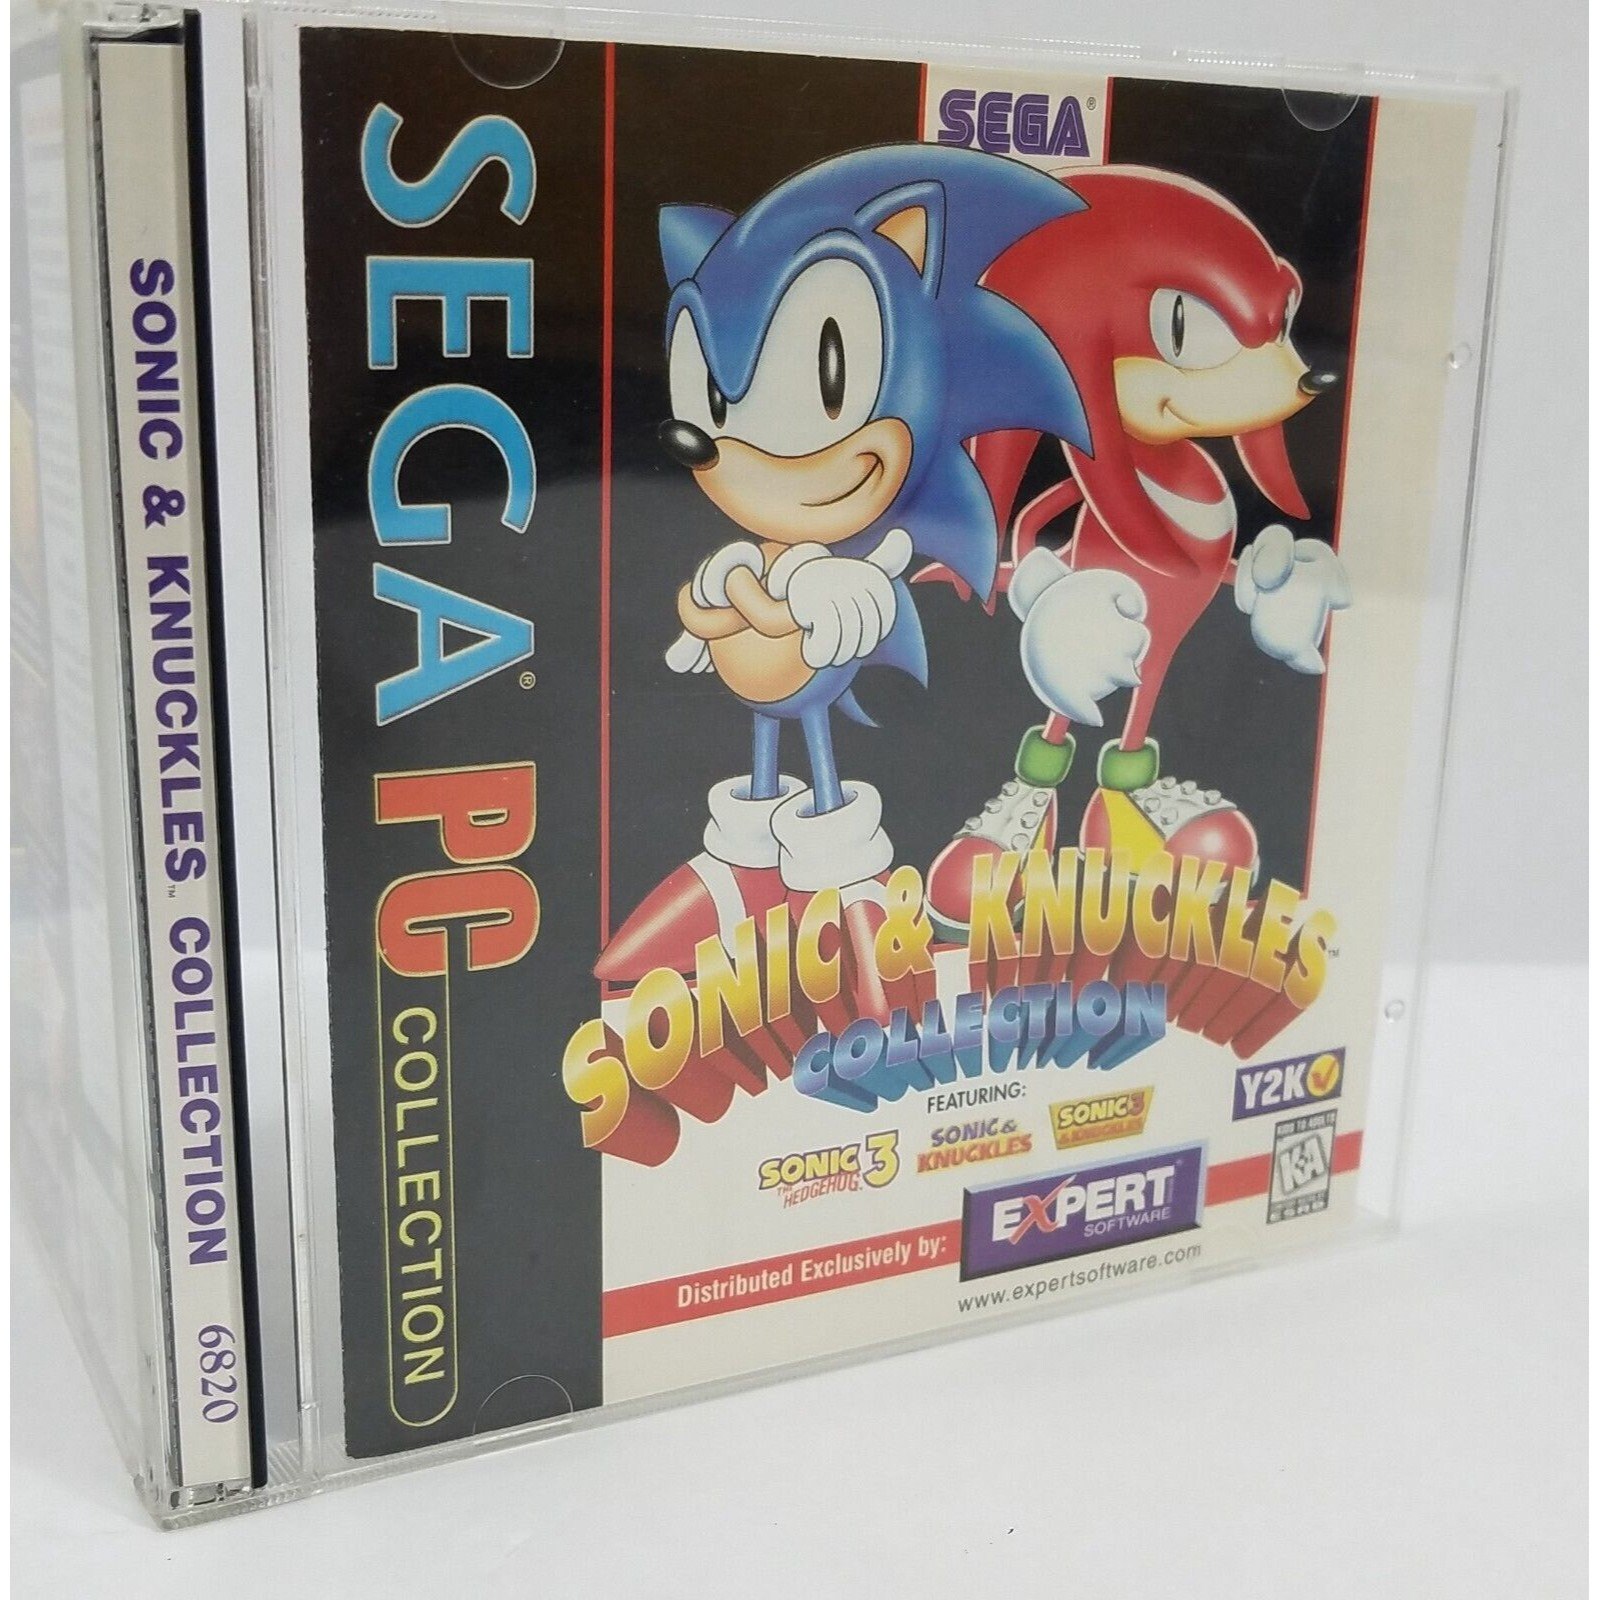 Still have the Sonic Classic Collection box for DS and manual mint  condition got this is like 2012 from my mom on Christmas its one of the  coolest collections out there 10/10 would recommend the DS is the perfect  console for Sonic games! : r